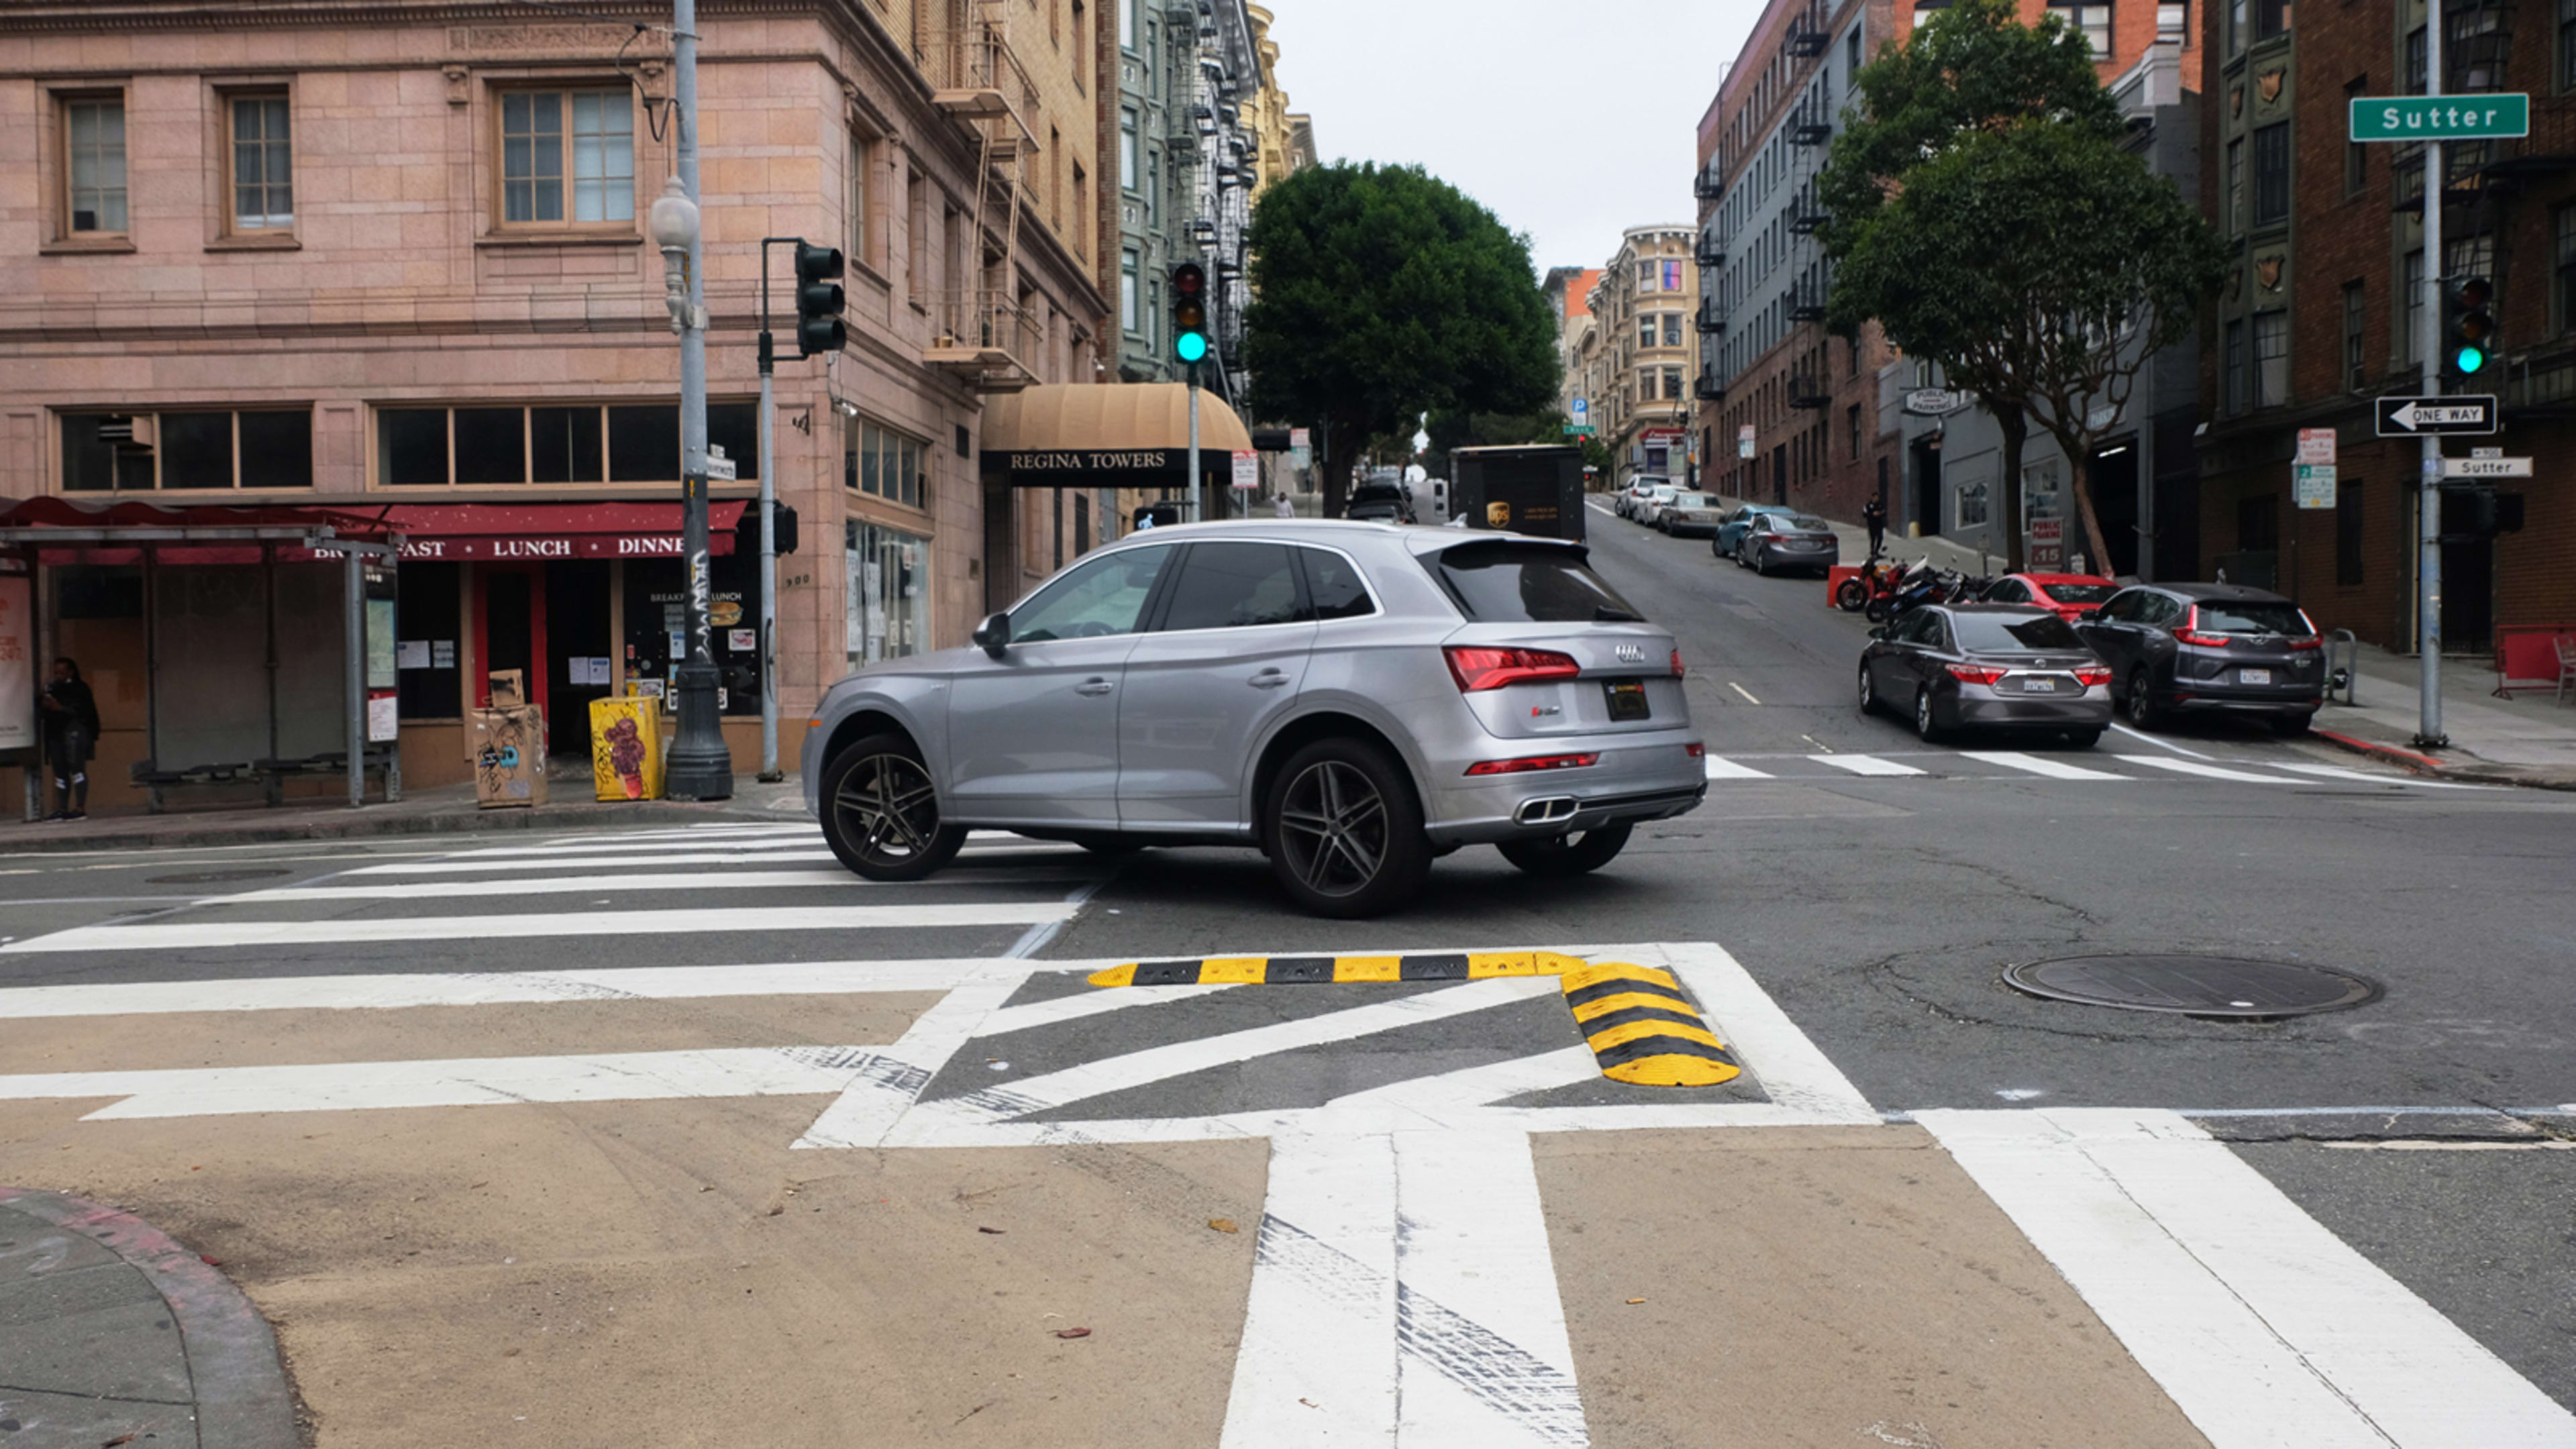 40% of San Francisco’s traffic deaths are from left turns. These design fixes could change that